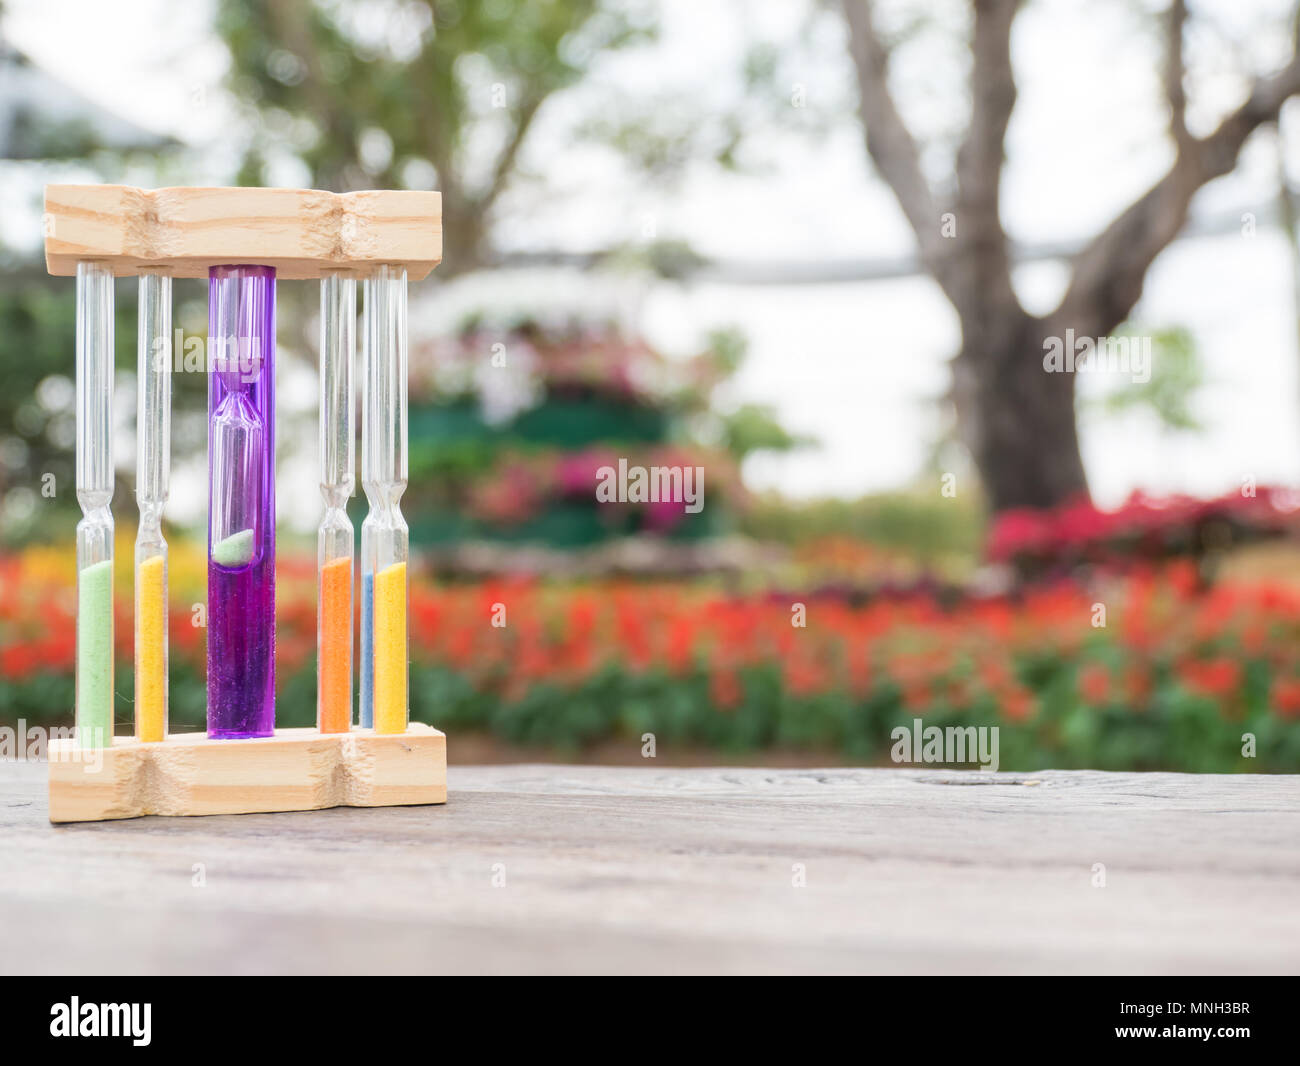 Hourglass on wooden table, blurred flower background, Stock Photo